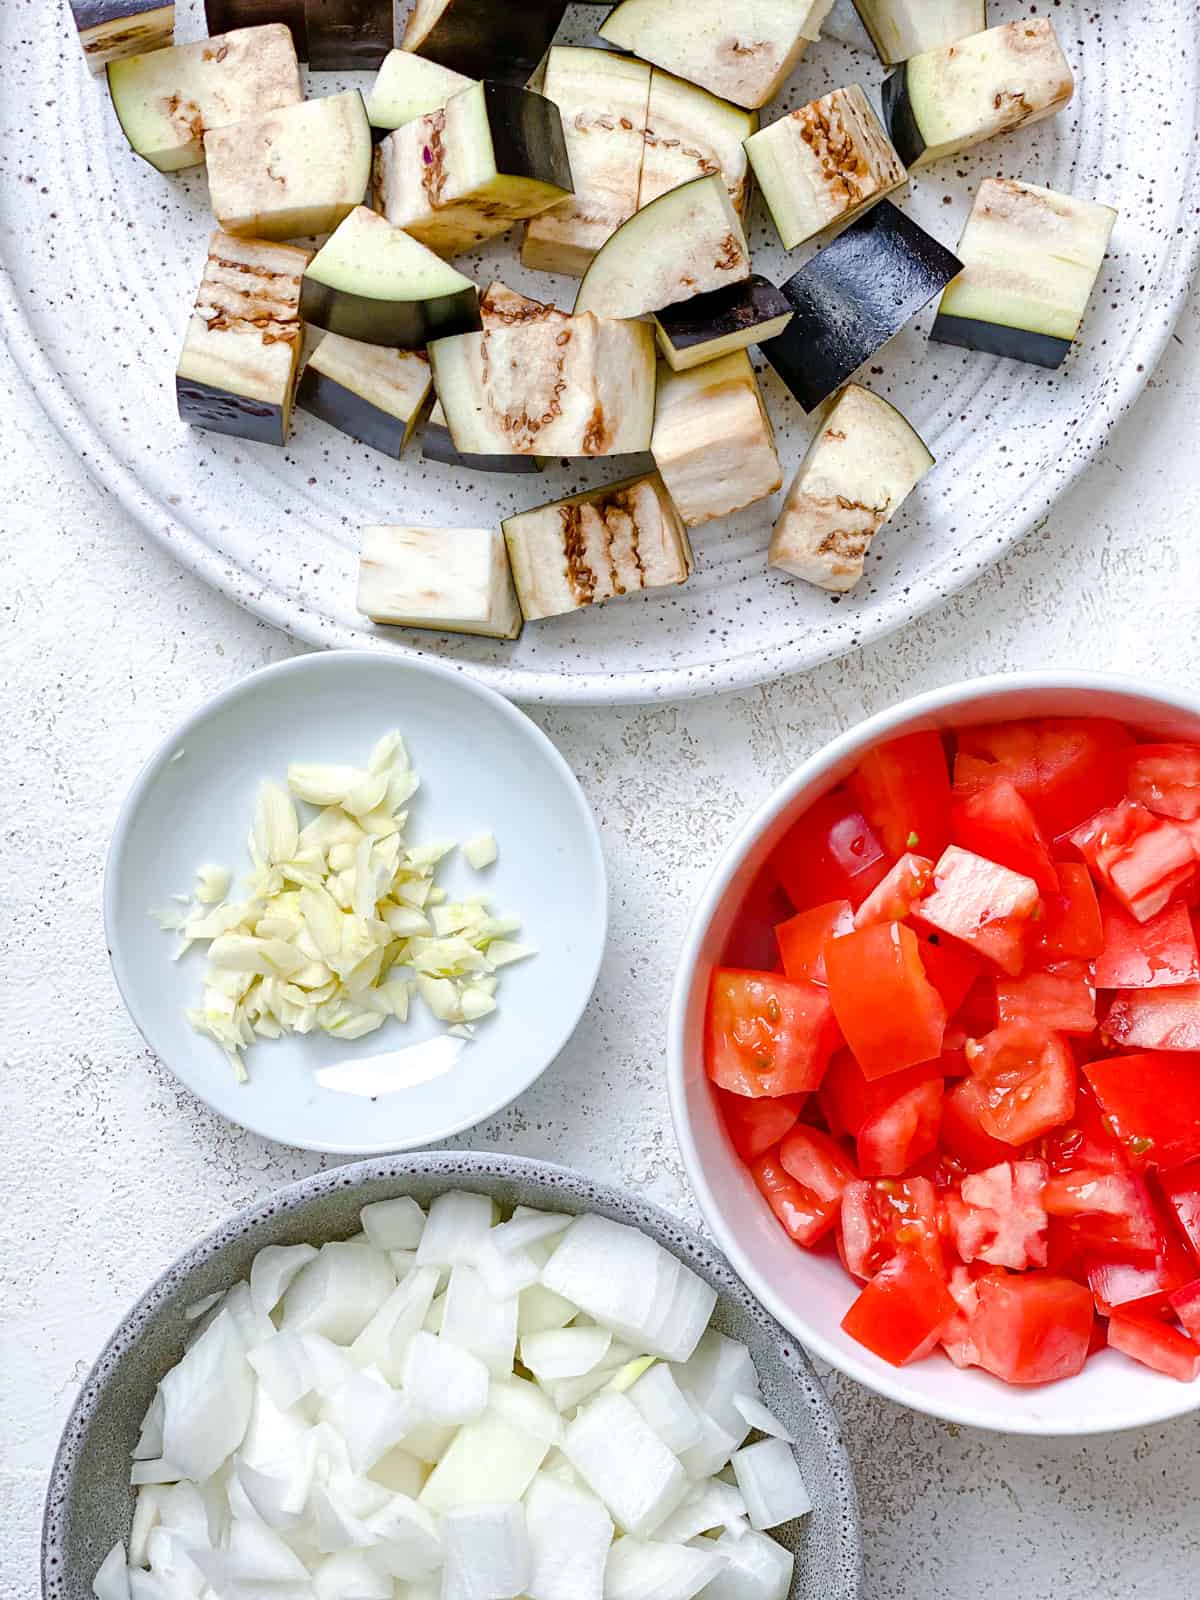 ingredients for Eggplant Pasta with Crispy Hazelnuts [Vegan] measured out a،nst a white surface